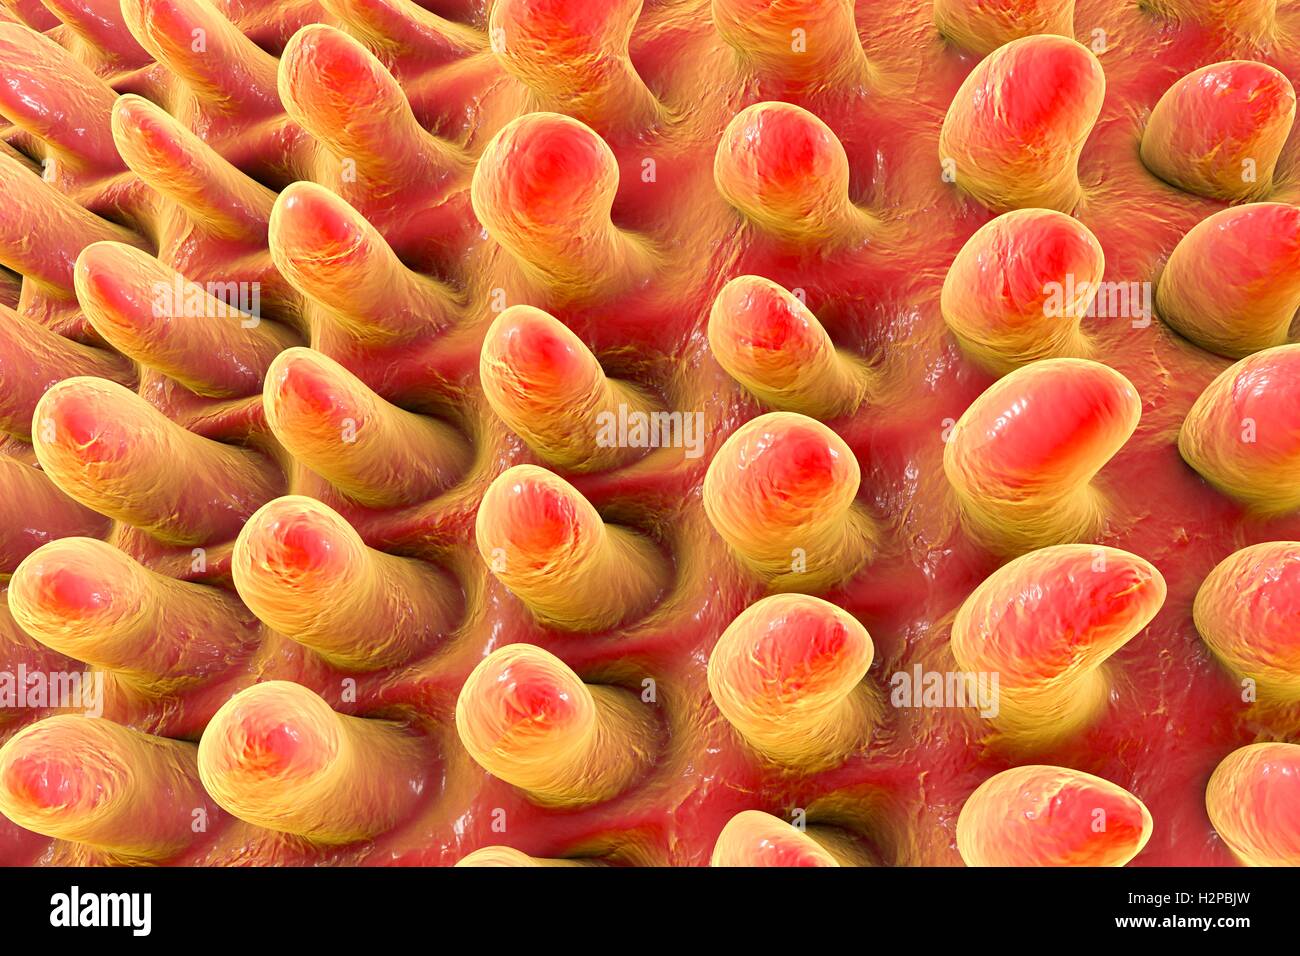 Tongue surface, computer illustration. Filiform papillae (cone-shaped) on the surface of the tongue. Filiform papillae contain nerve endings that transmit tactile (touch) information to the brain. Stock Photo